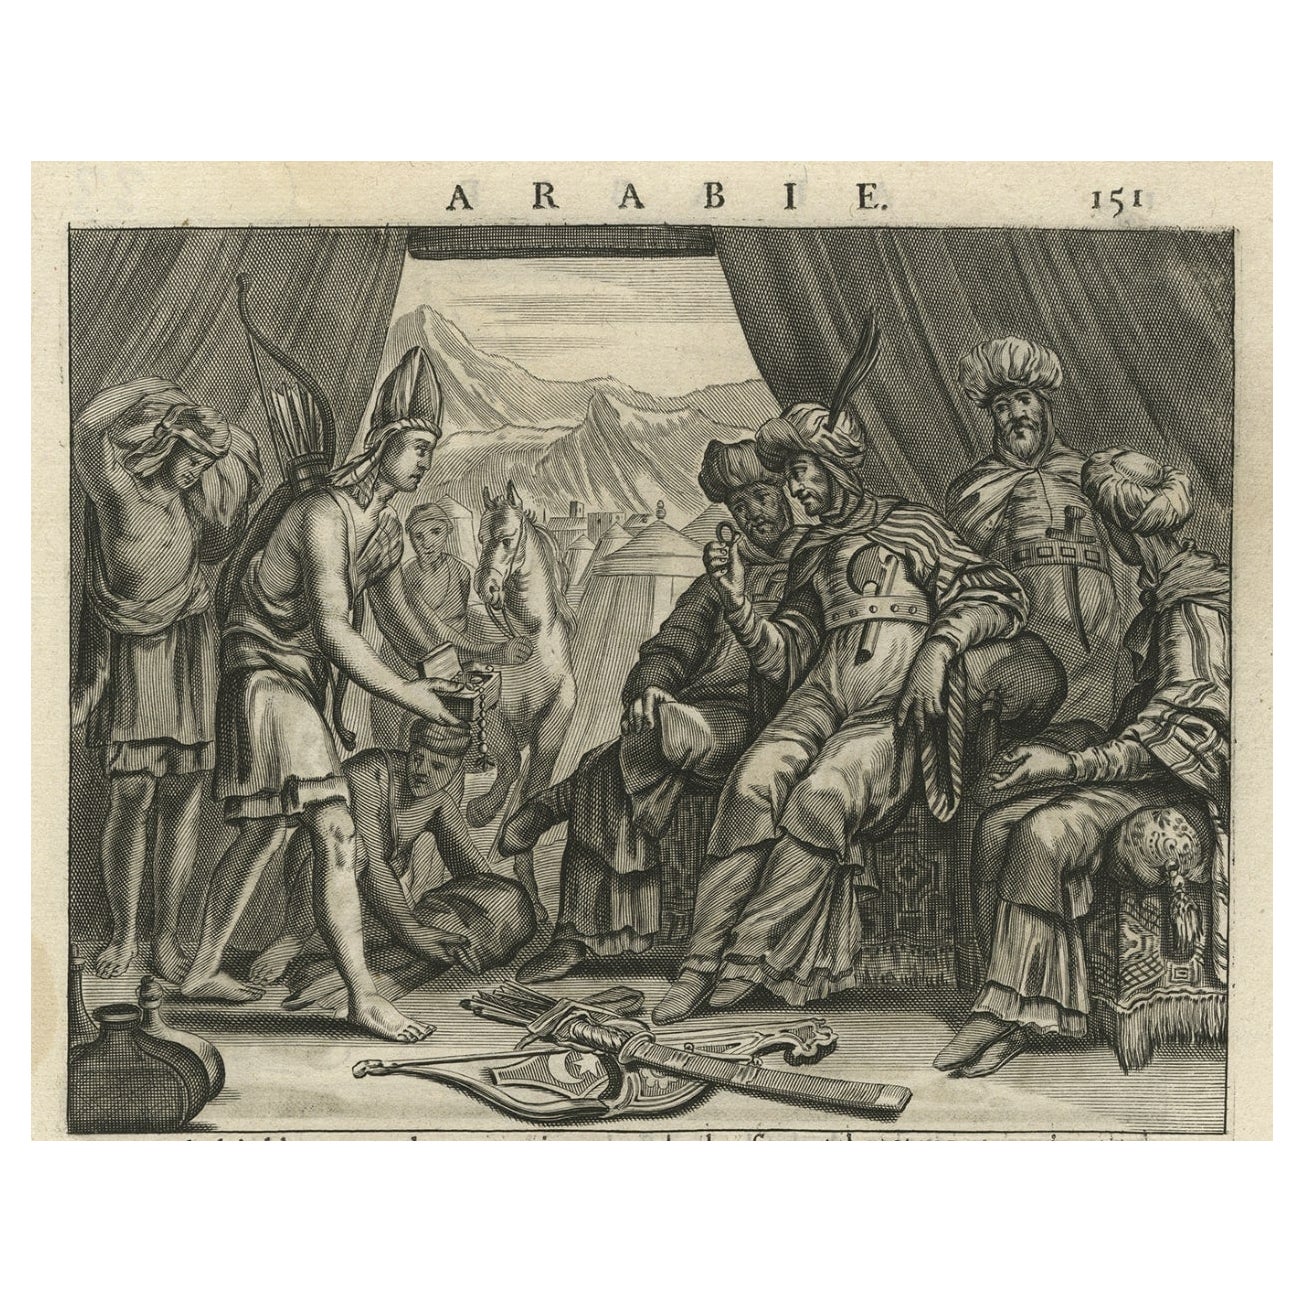 Old Original Print Showing Arab People with Weapons Receiving Gifts, Ca.1680